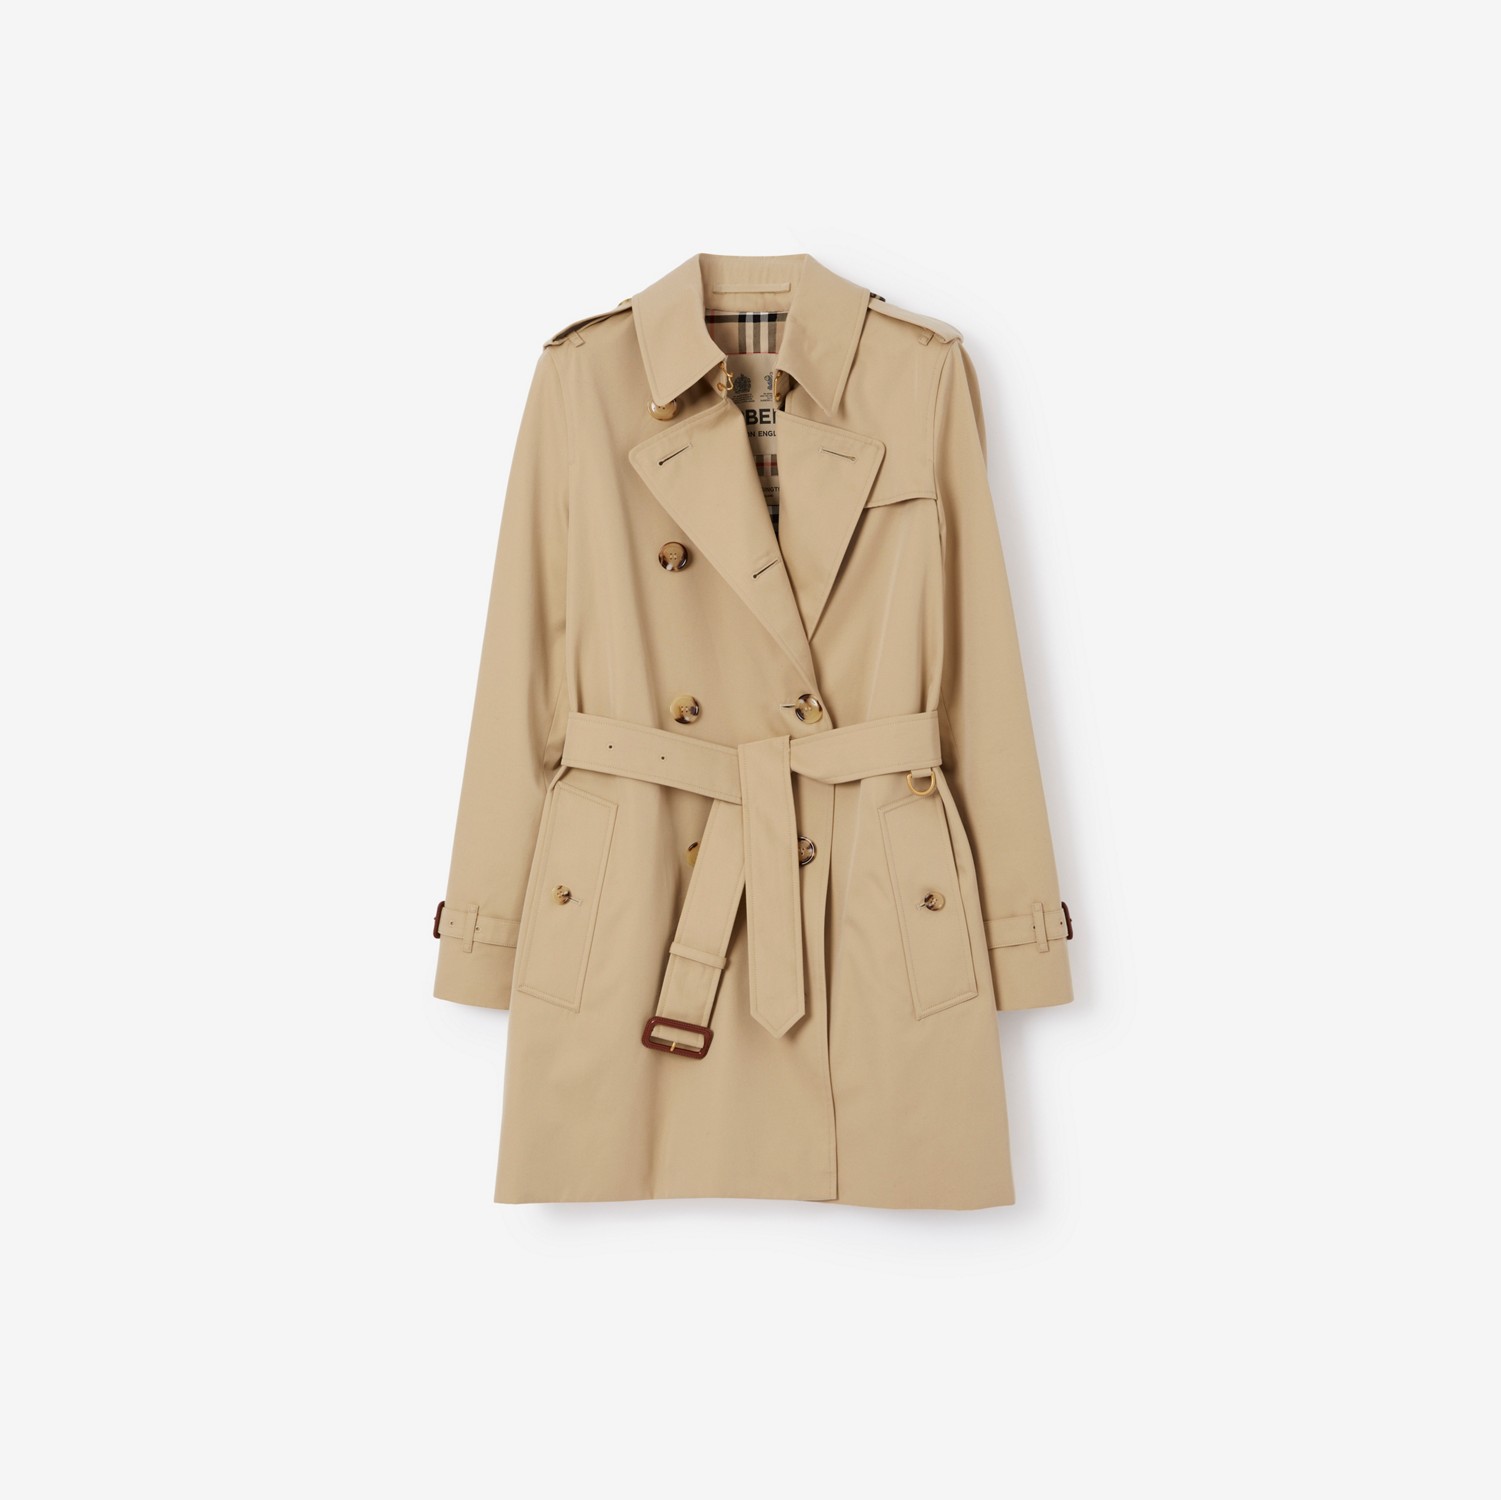 Kensington - Trench coat Heritage curto (Mel) - Mulheres | Burberry® oficial